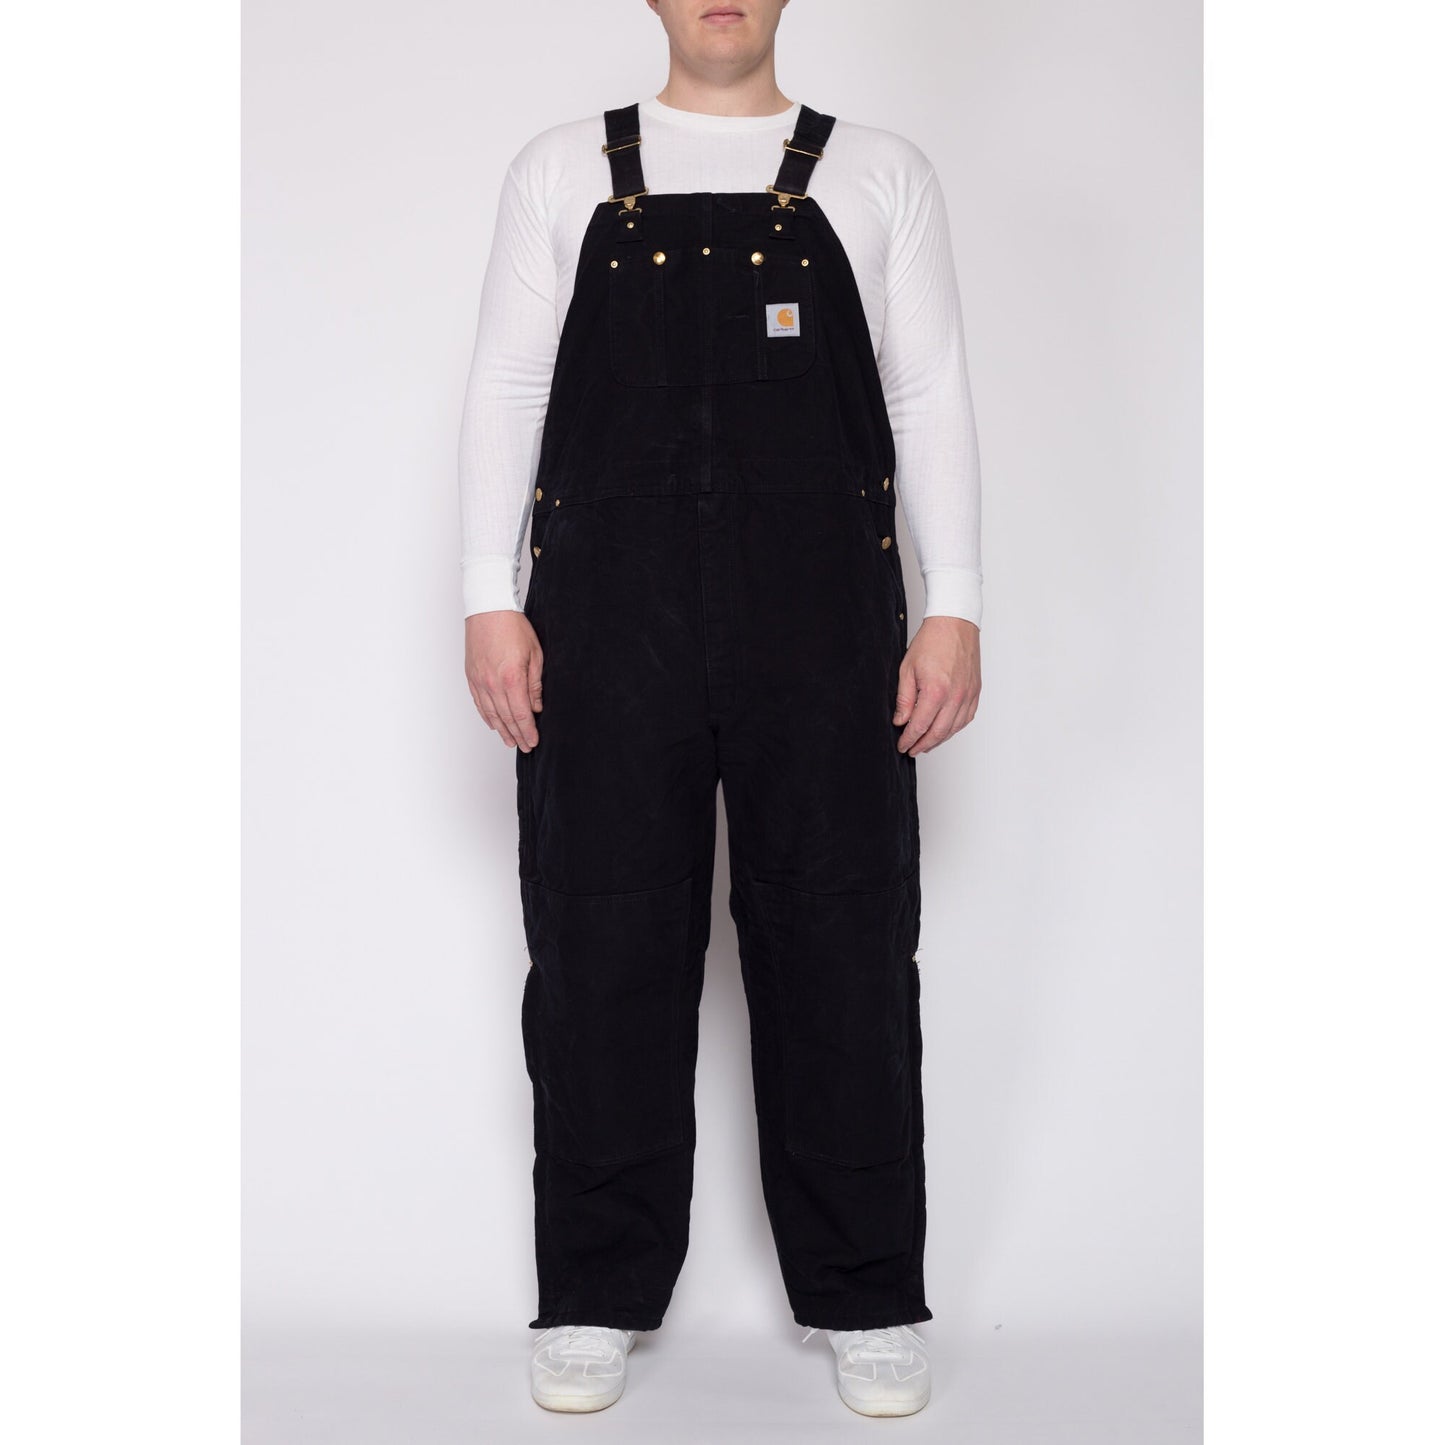 Vintage Carhartt Black Insulated Quilt Lined Overalls - Men's 2XL | 90s Union Made Duck Canvas Workwear Jumpsuit